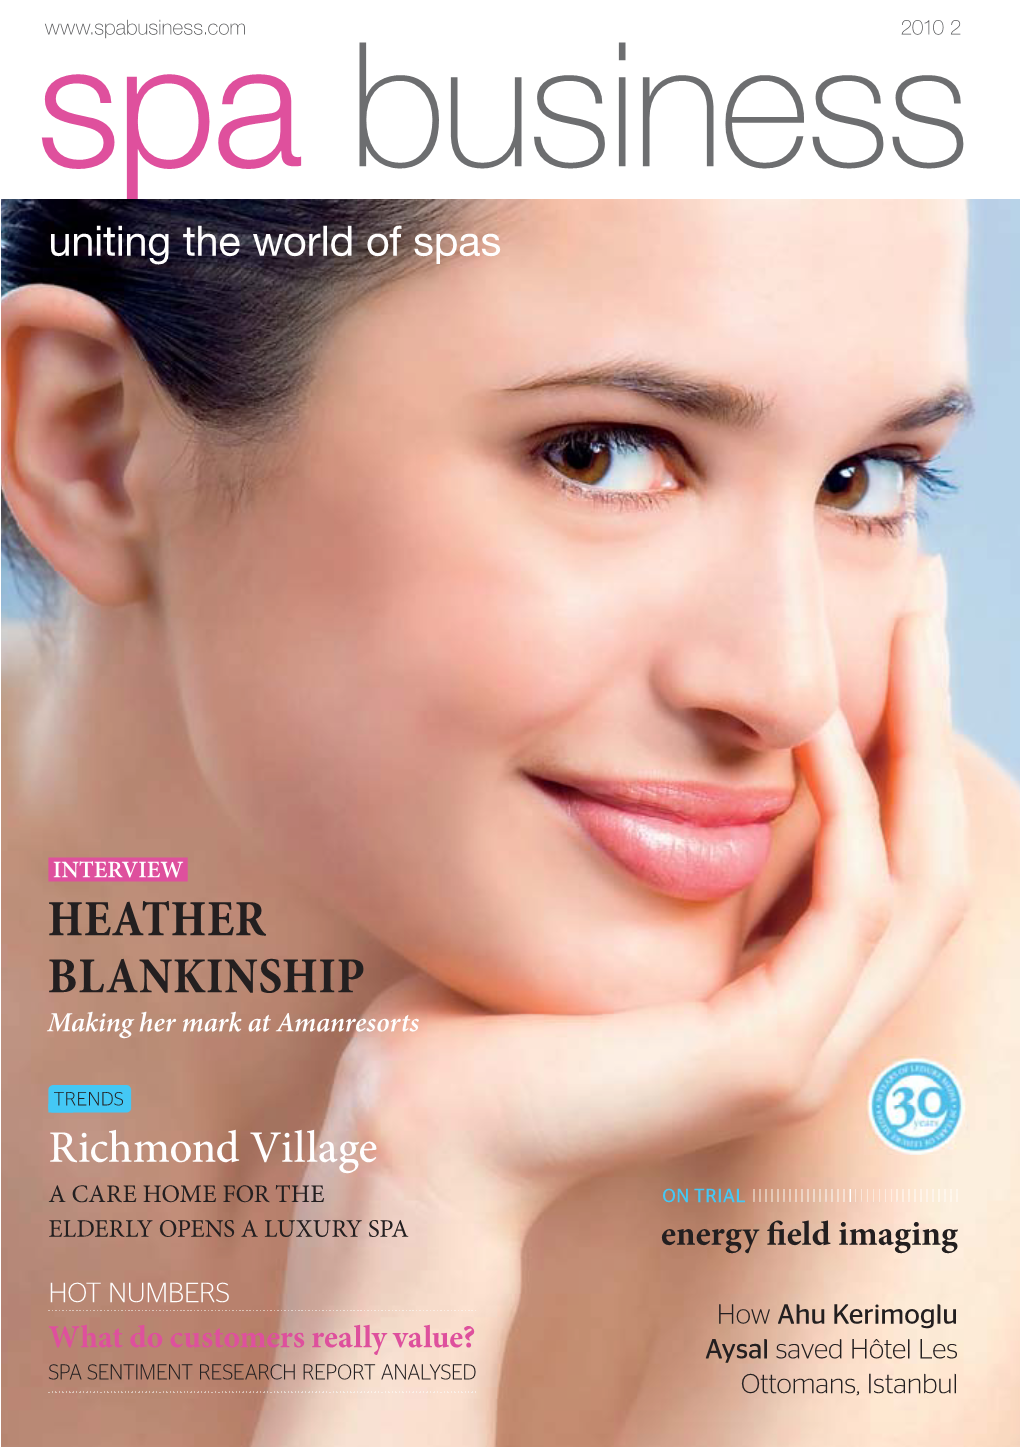 Spa Business Magazine Issue 2 2010